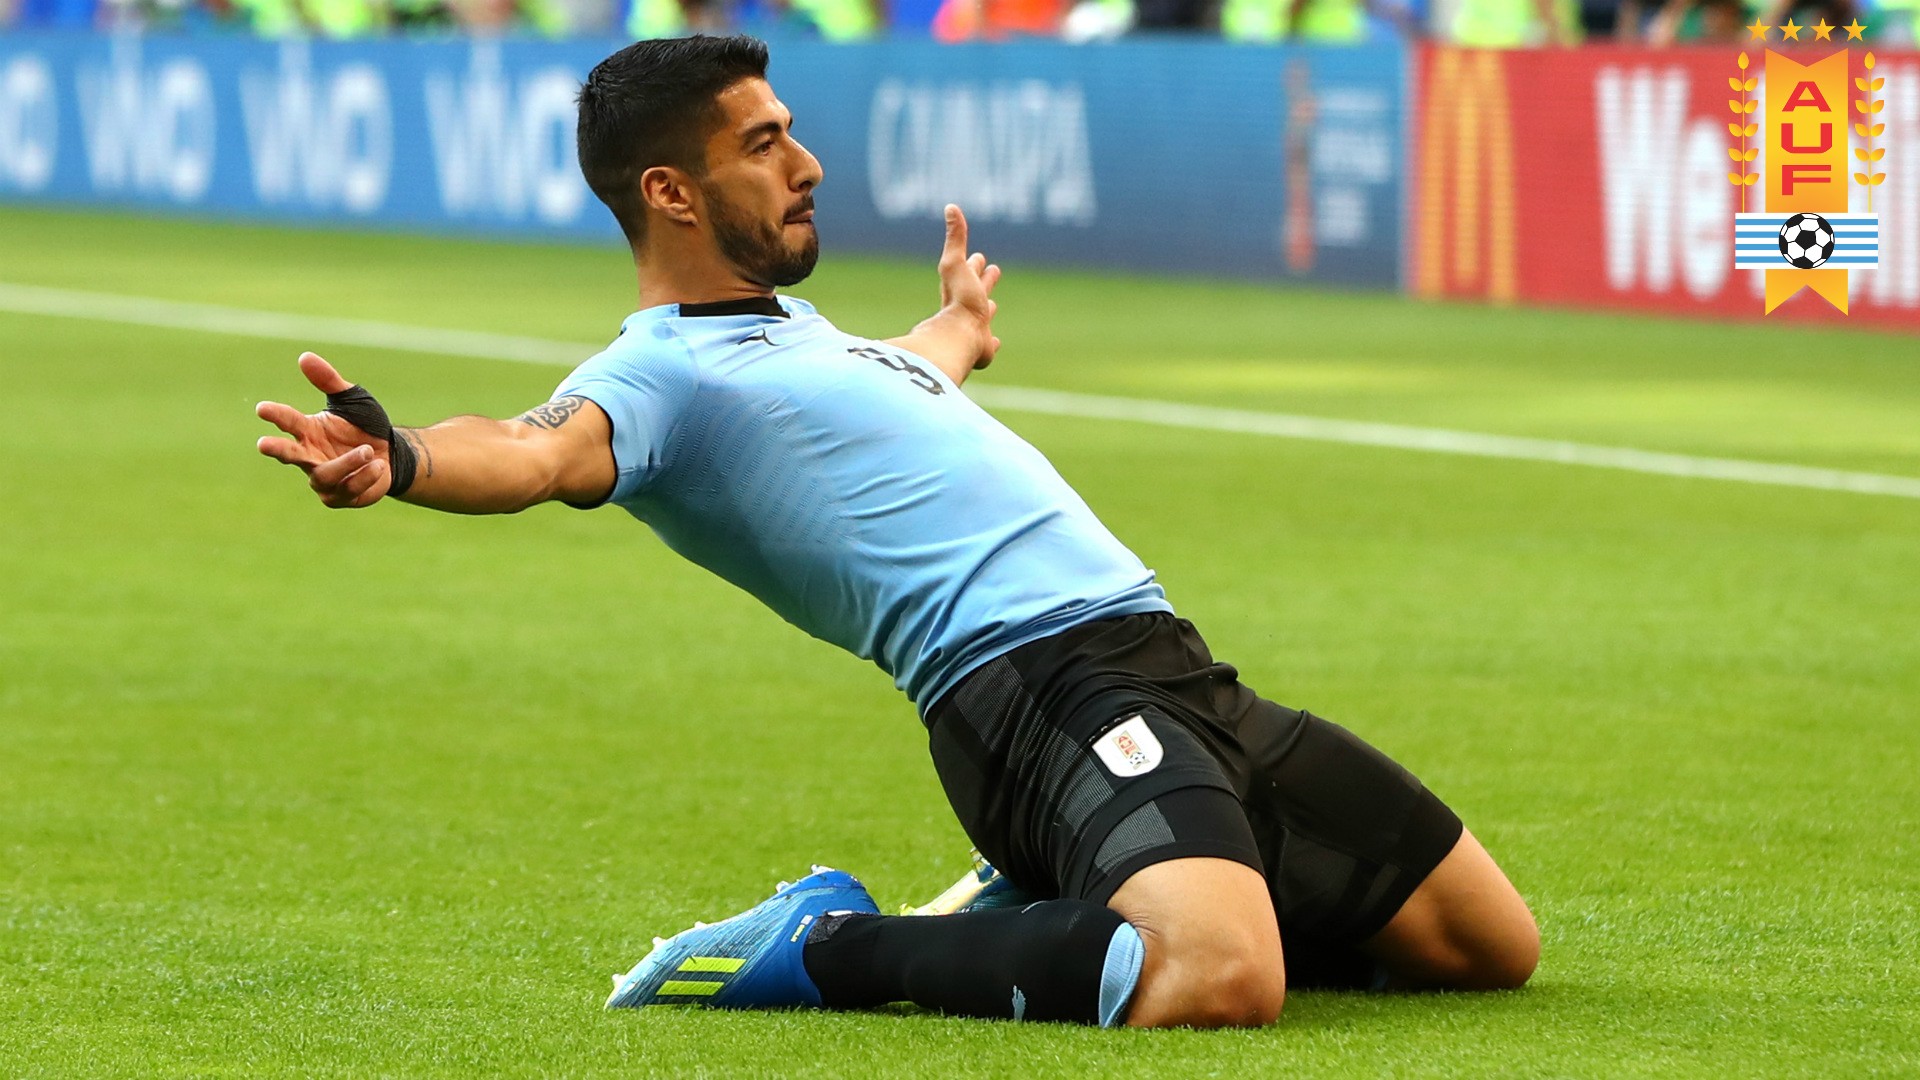 Wallpapers HD Luis Suarez Uruguay with resolution 1920x1080 pixel. You can make this wallpaper for your Mac or Windows Desktop Background, iPhone, Android or Tablet and another Smartphone device